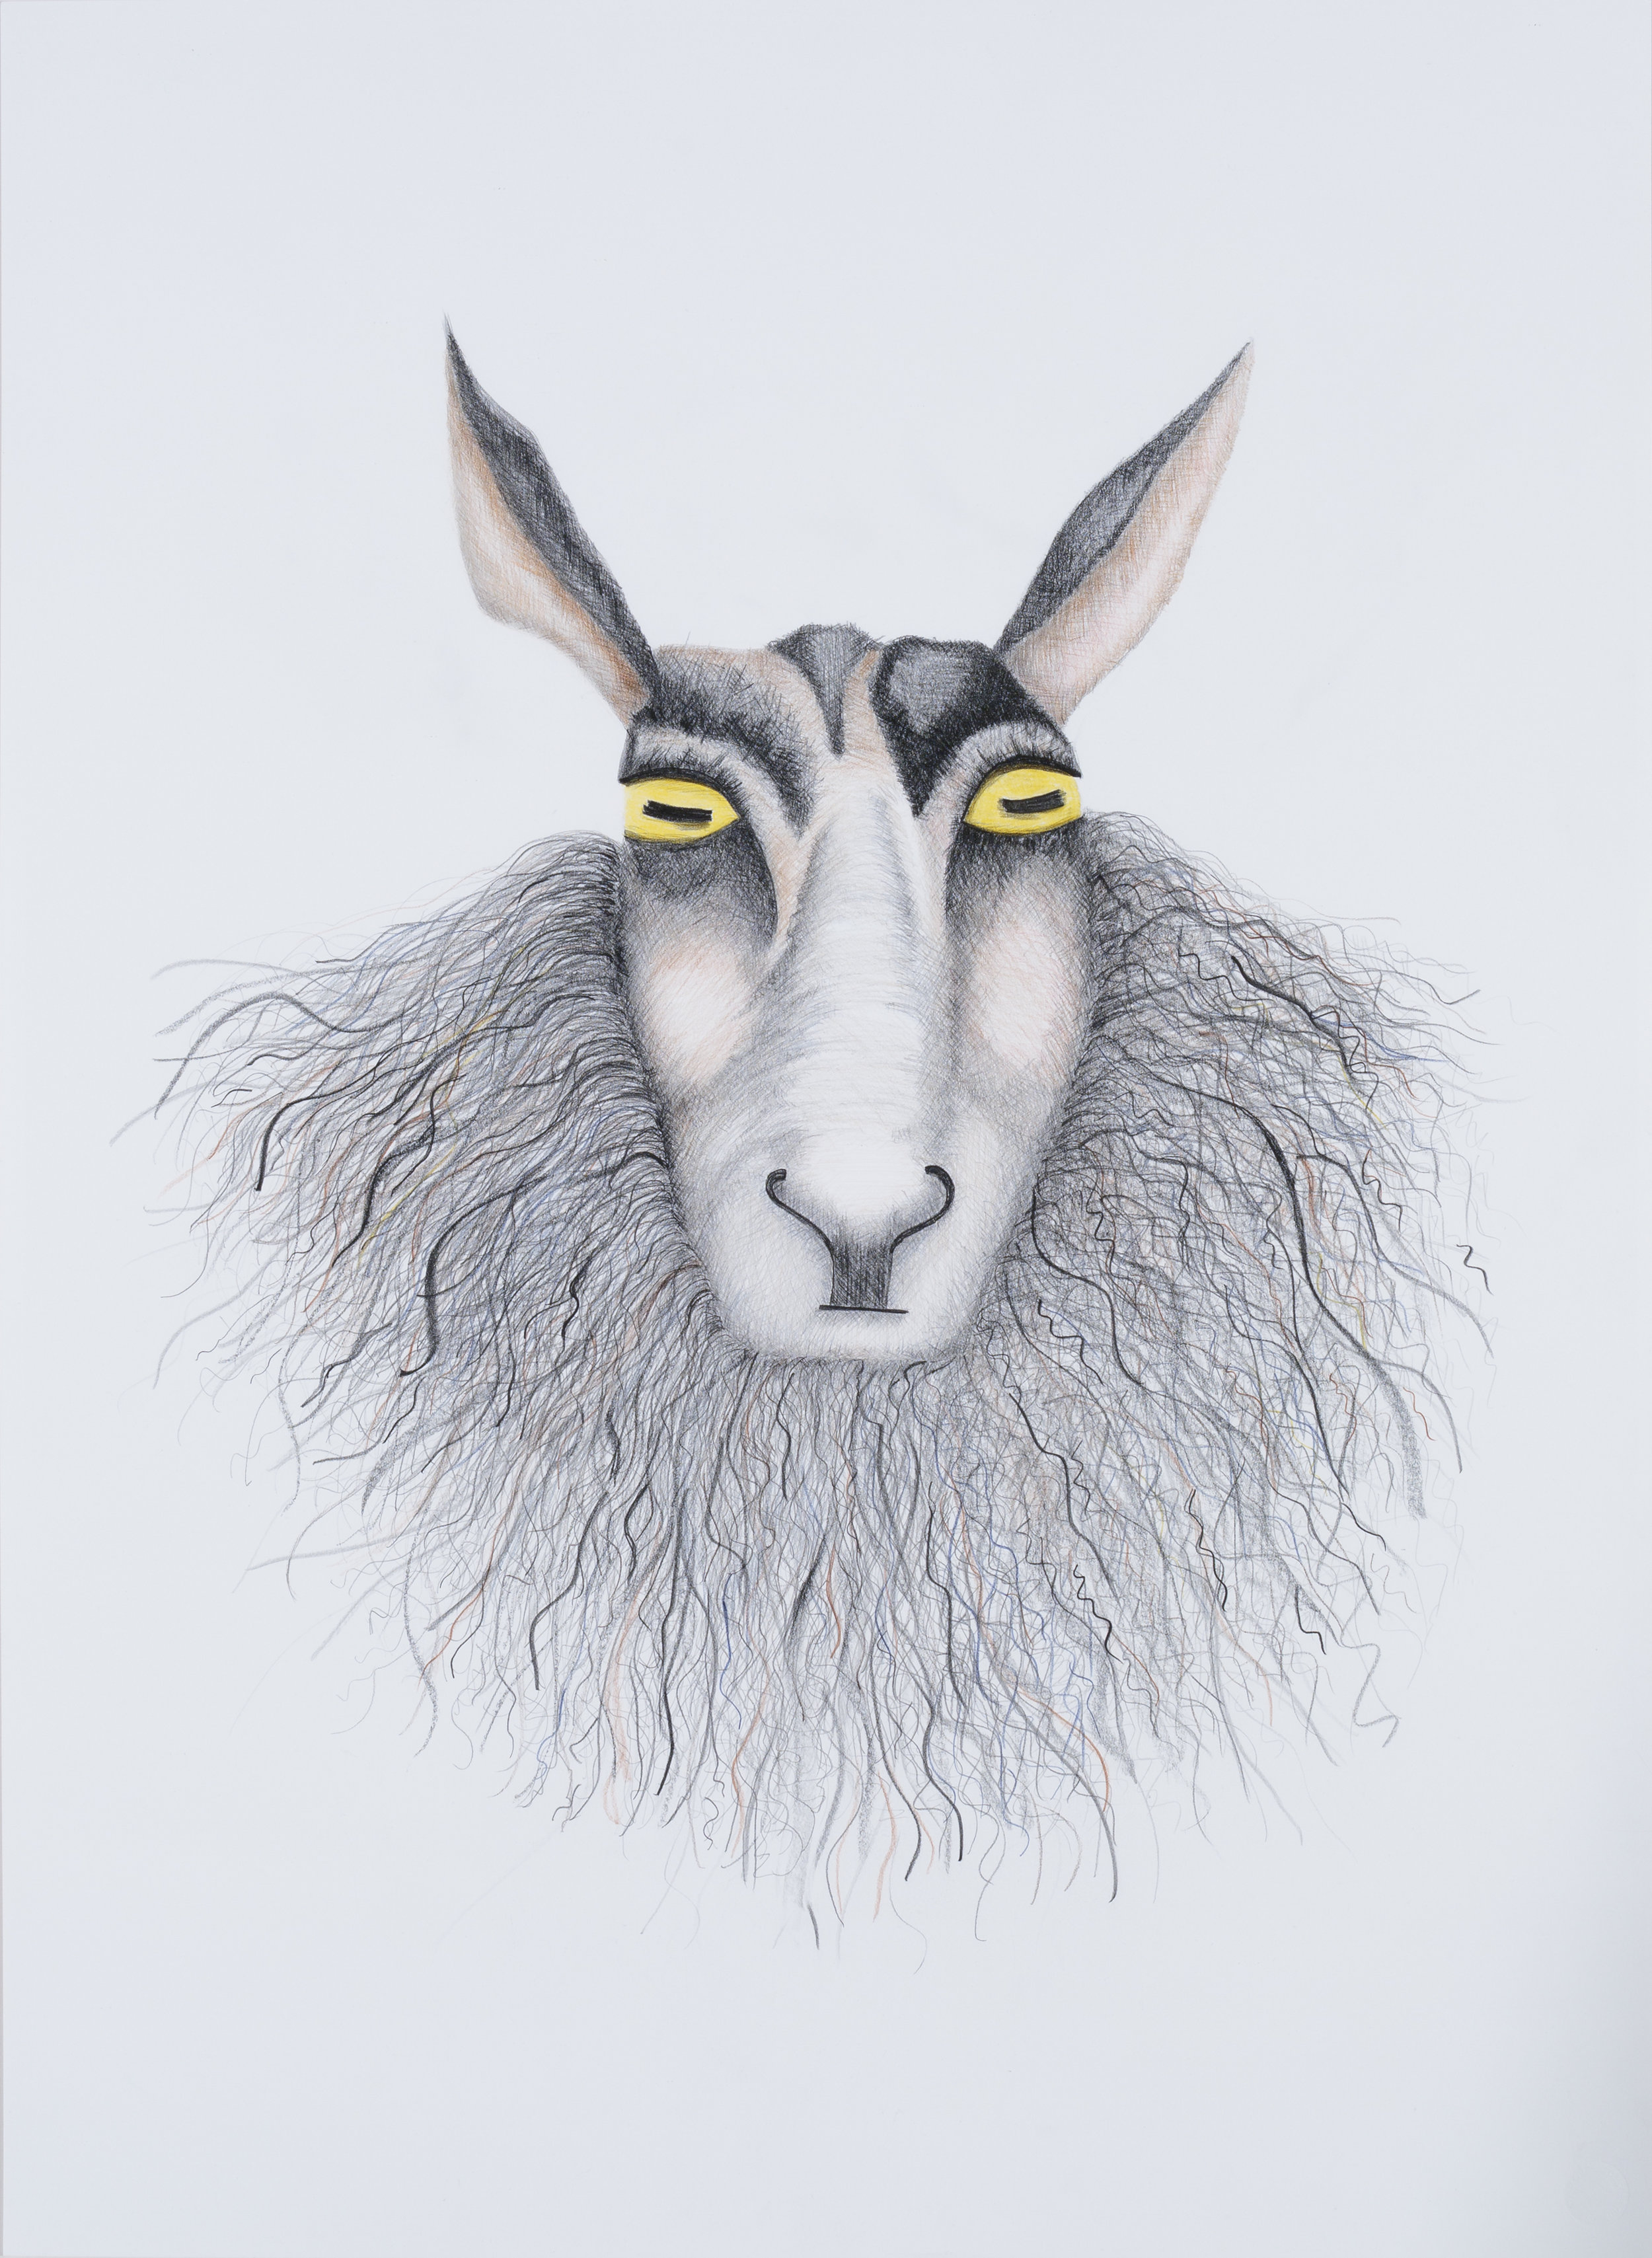   KEEPERS OF MY SECRETS: SHEEP   Graphite, colored pencil  35" x 26.5" 